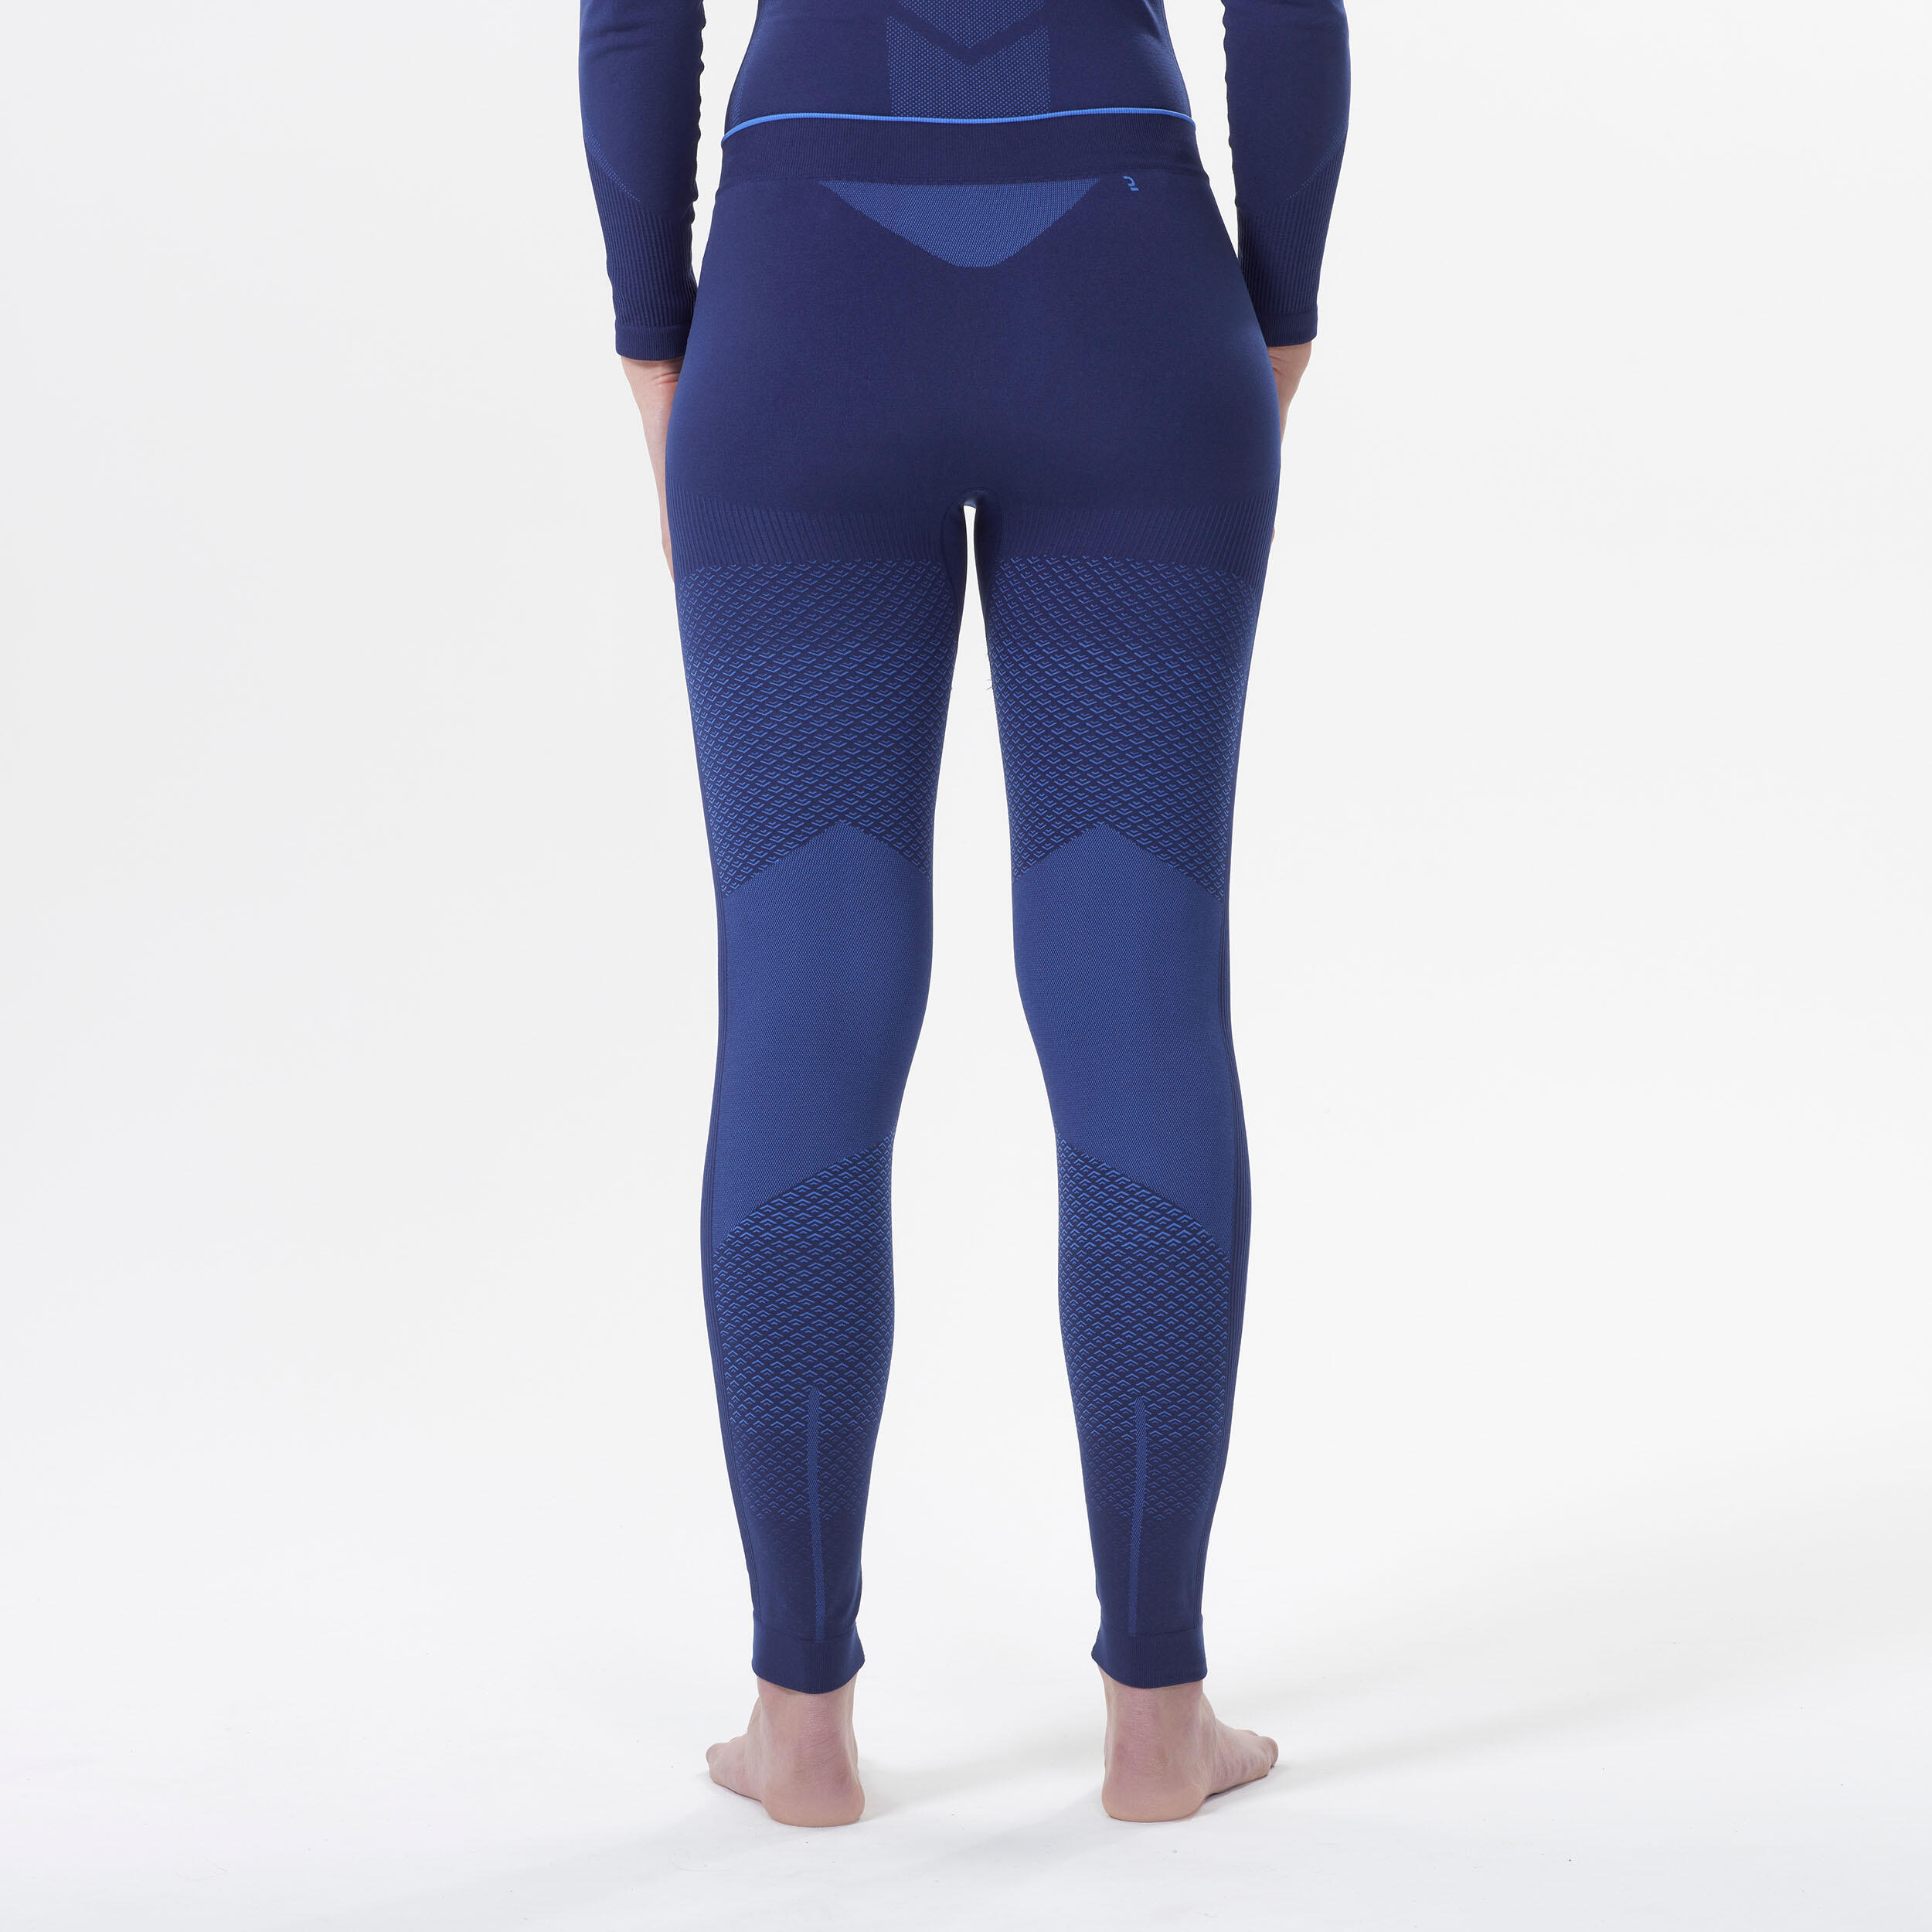 Women’s Cross-Country Skiing Base Layer Bottoms - 900 Blue